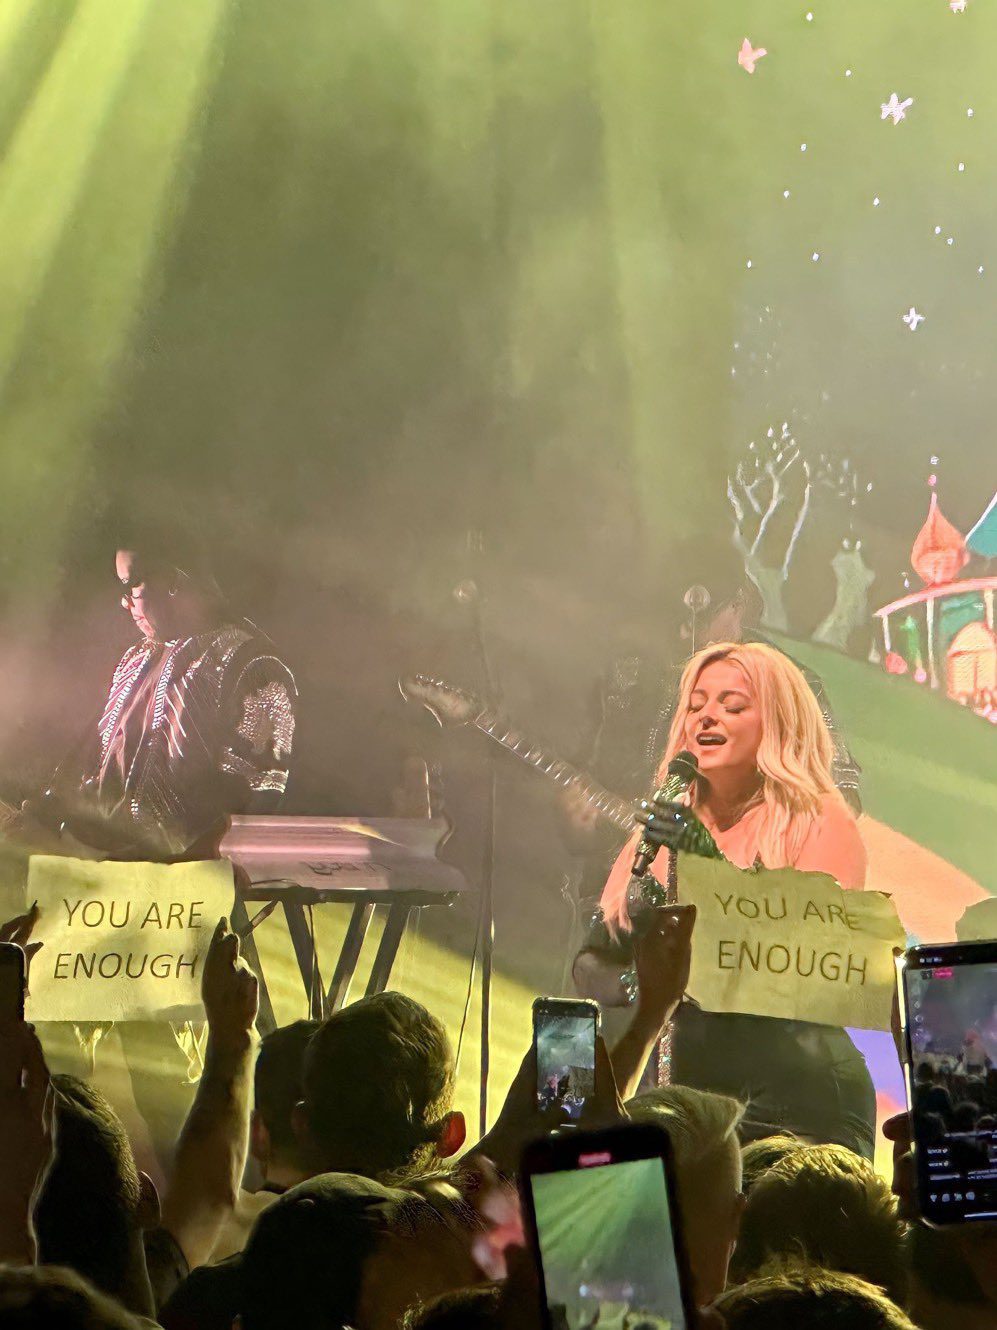 Bebe Rexha Moved to Tears as Fans Display 'You Are Enough' Signs During Concert